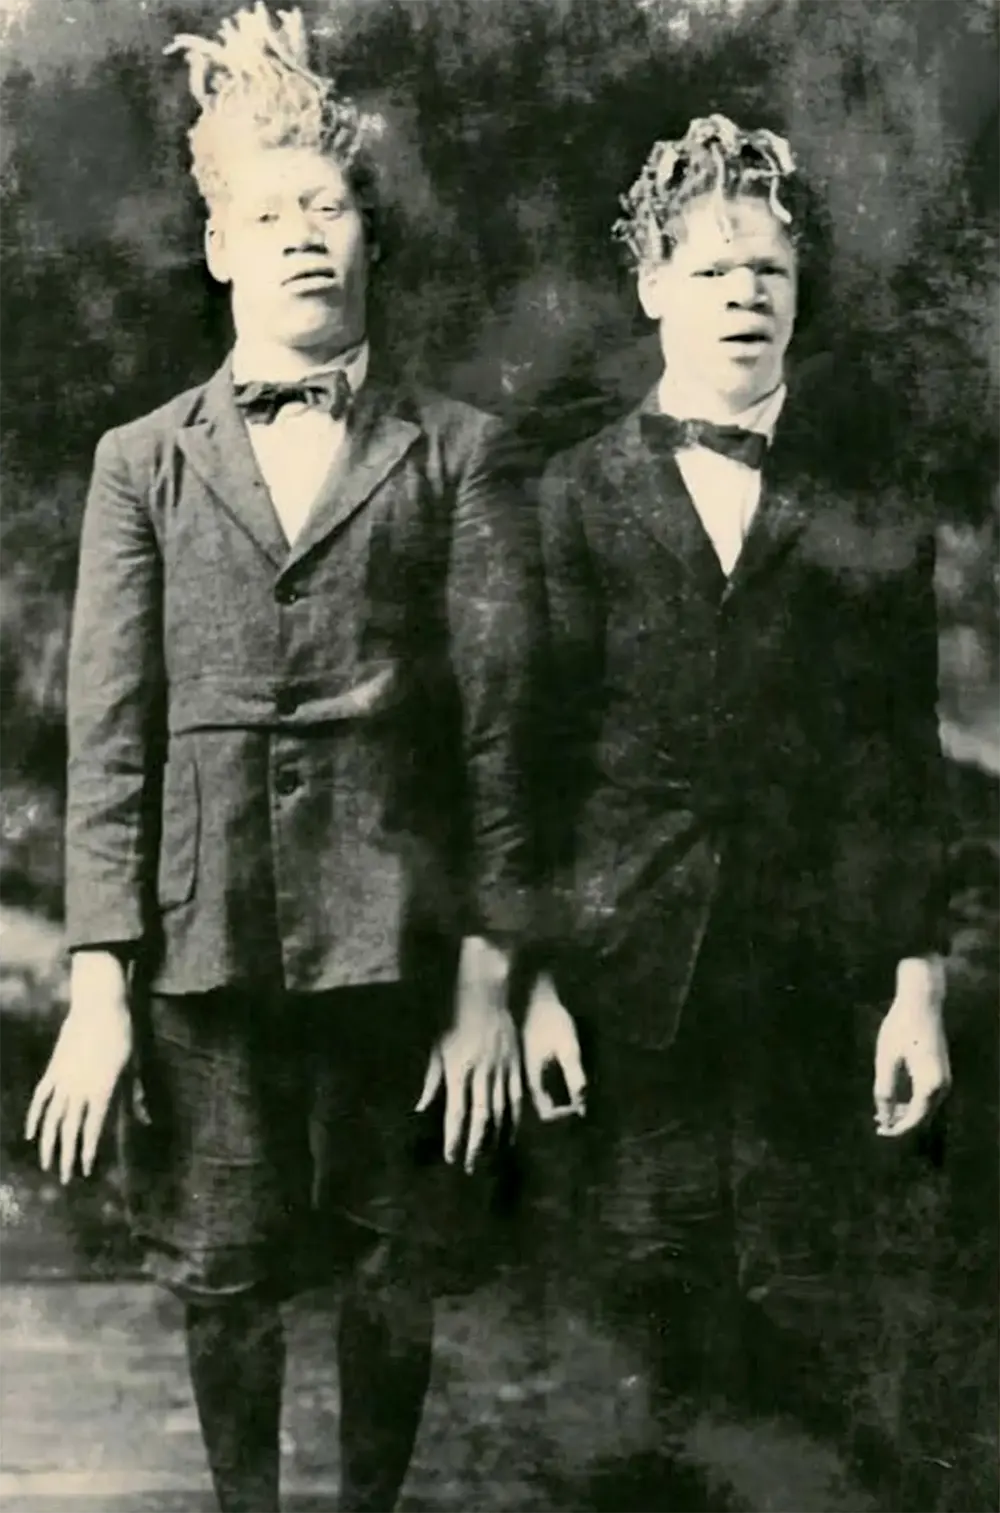 George and Willie Muse in the earliest known photograph of them in the circus.